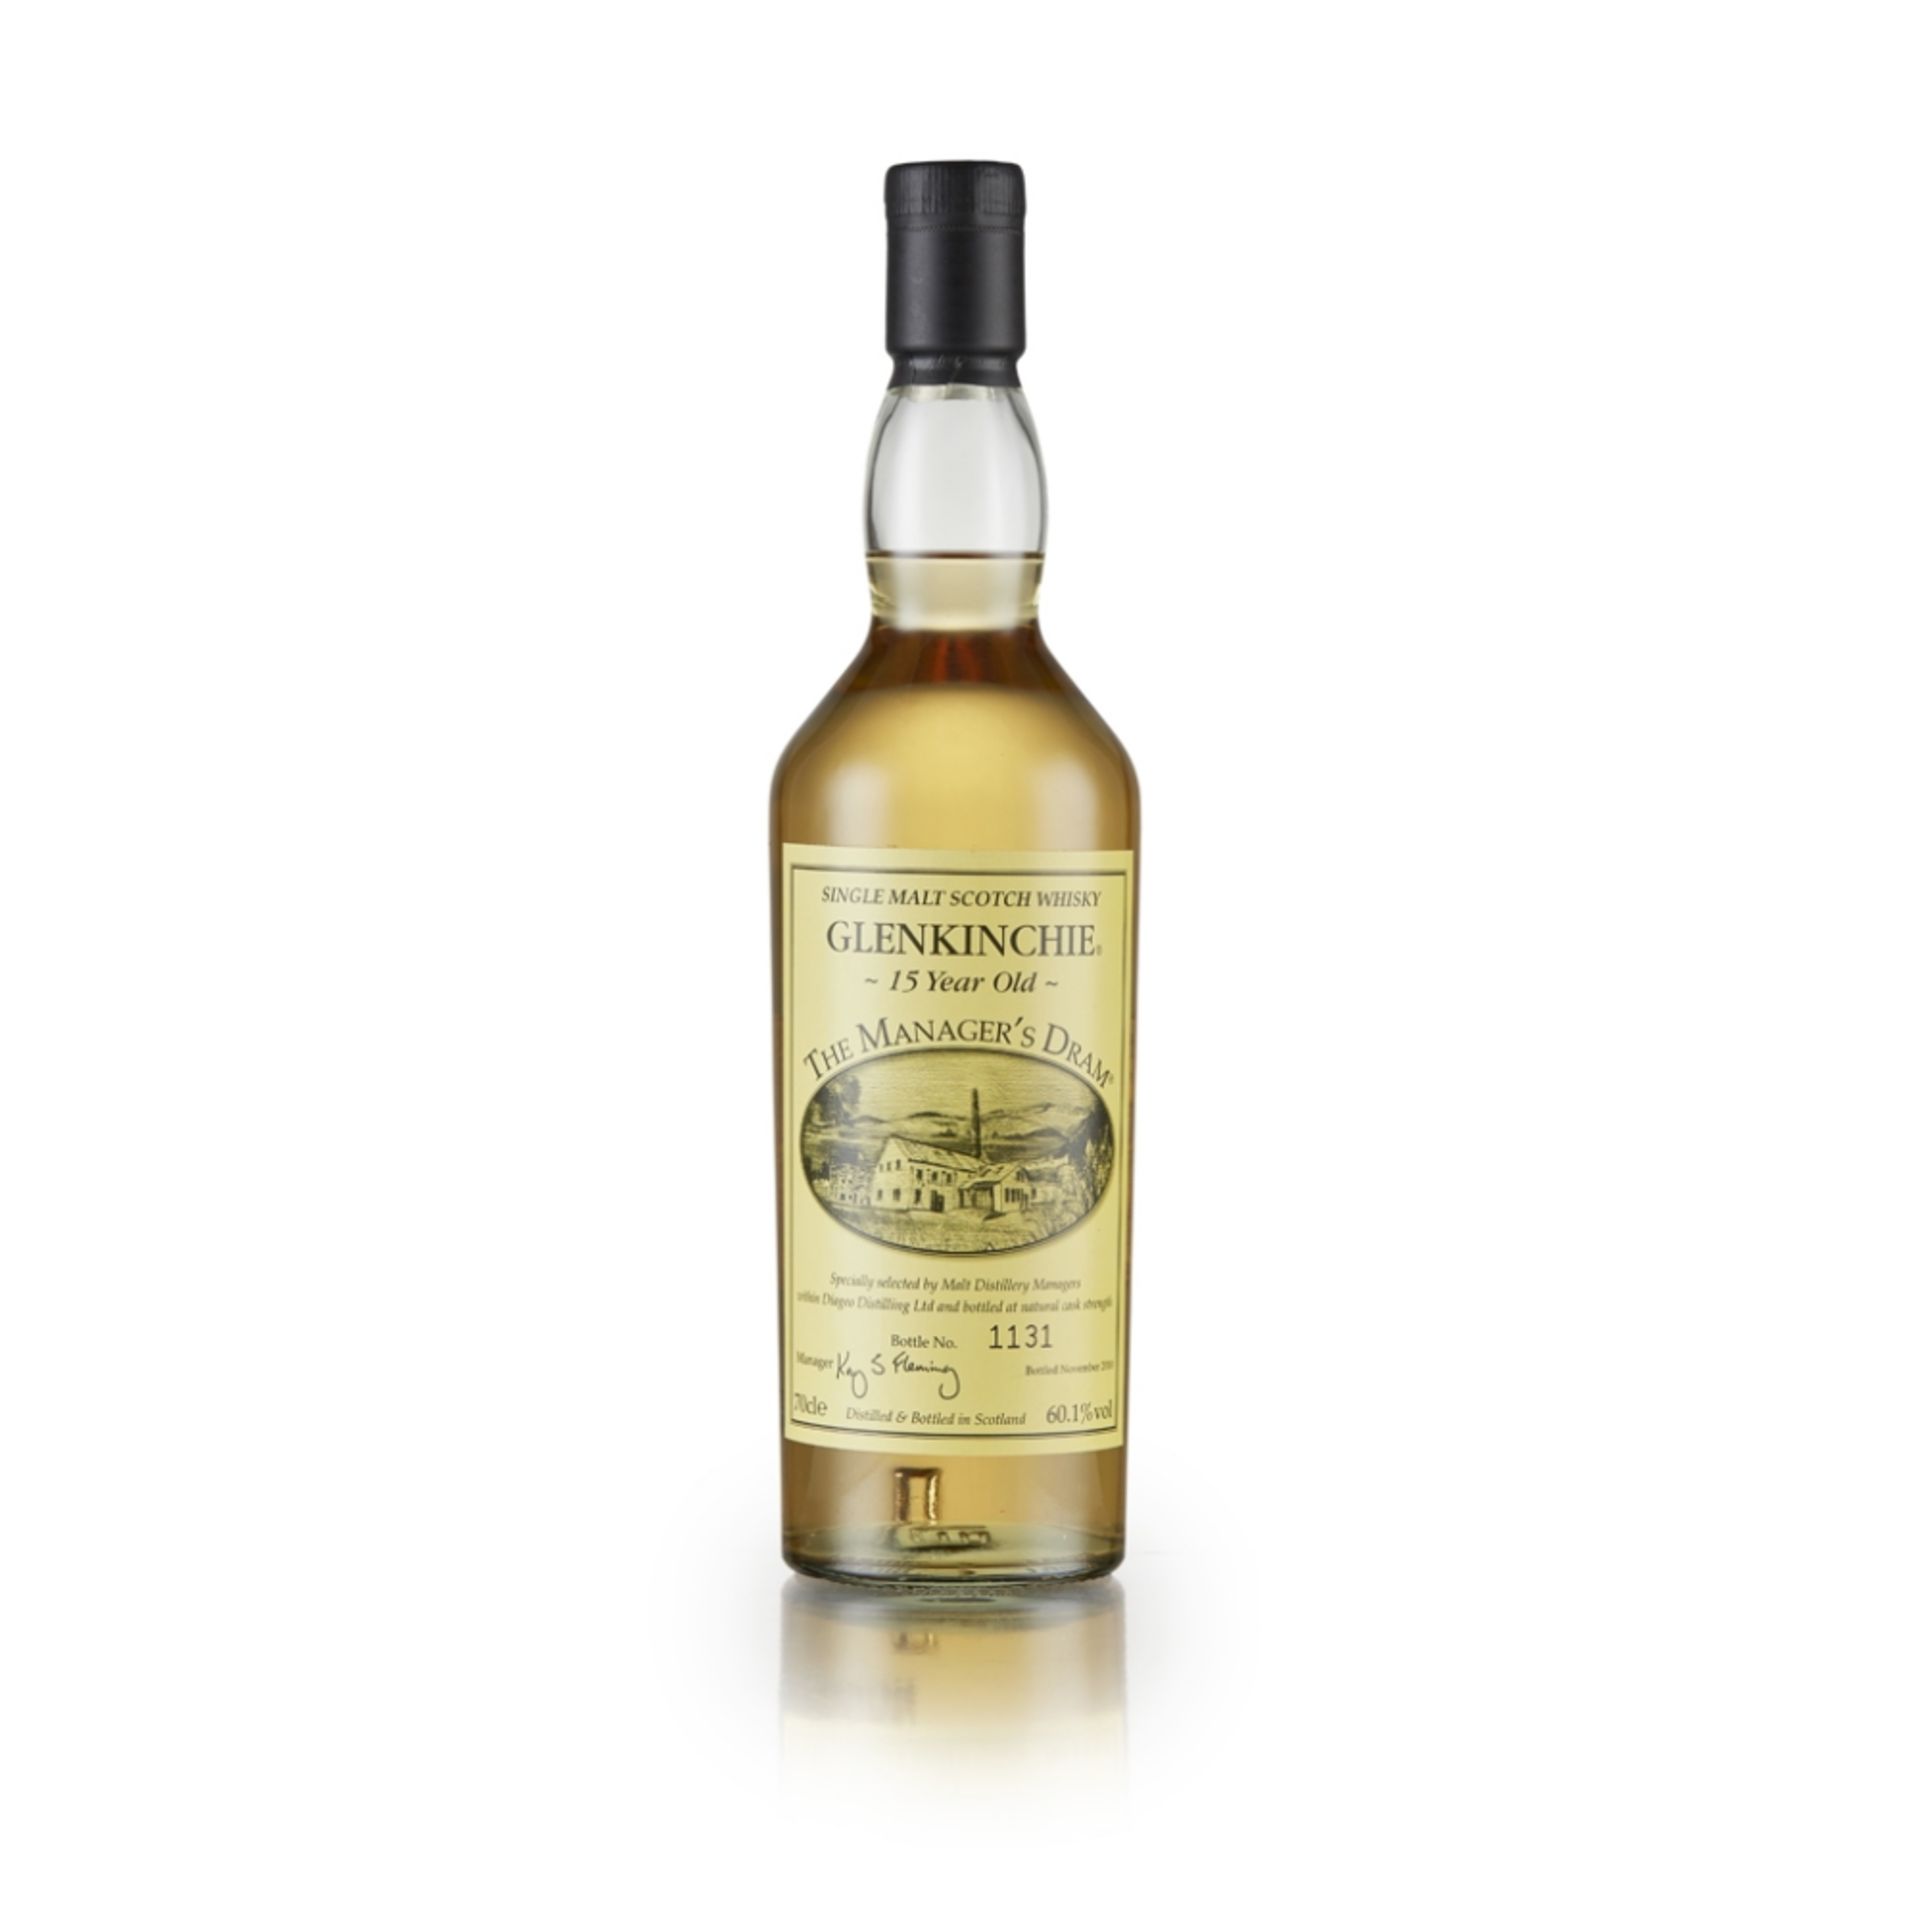 GLENKINCHIE 15 YEAR OLD - THE MANAGER'S DRAM DISTILLERY ACTIVE bottle number 1131 70cl/ 60.1%